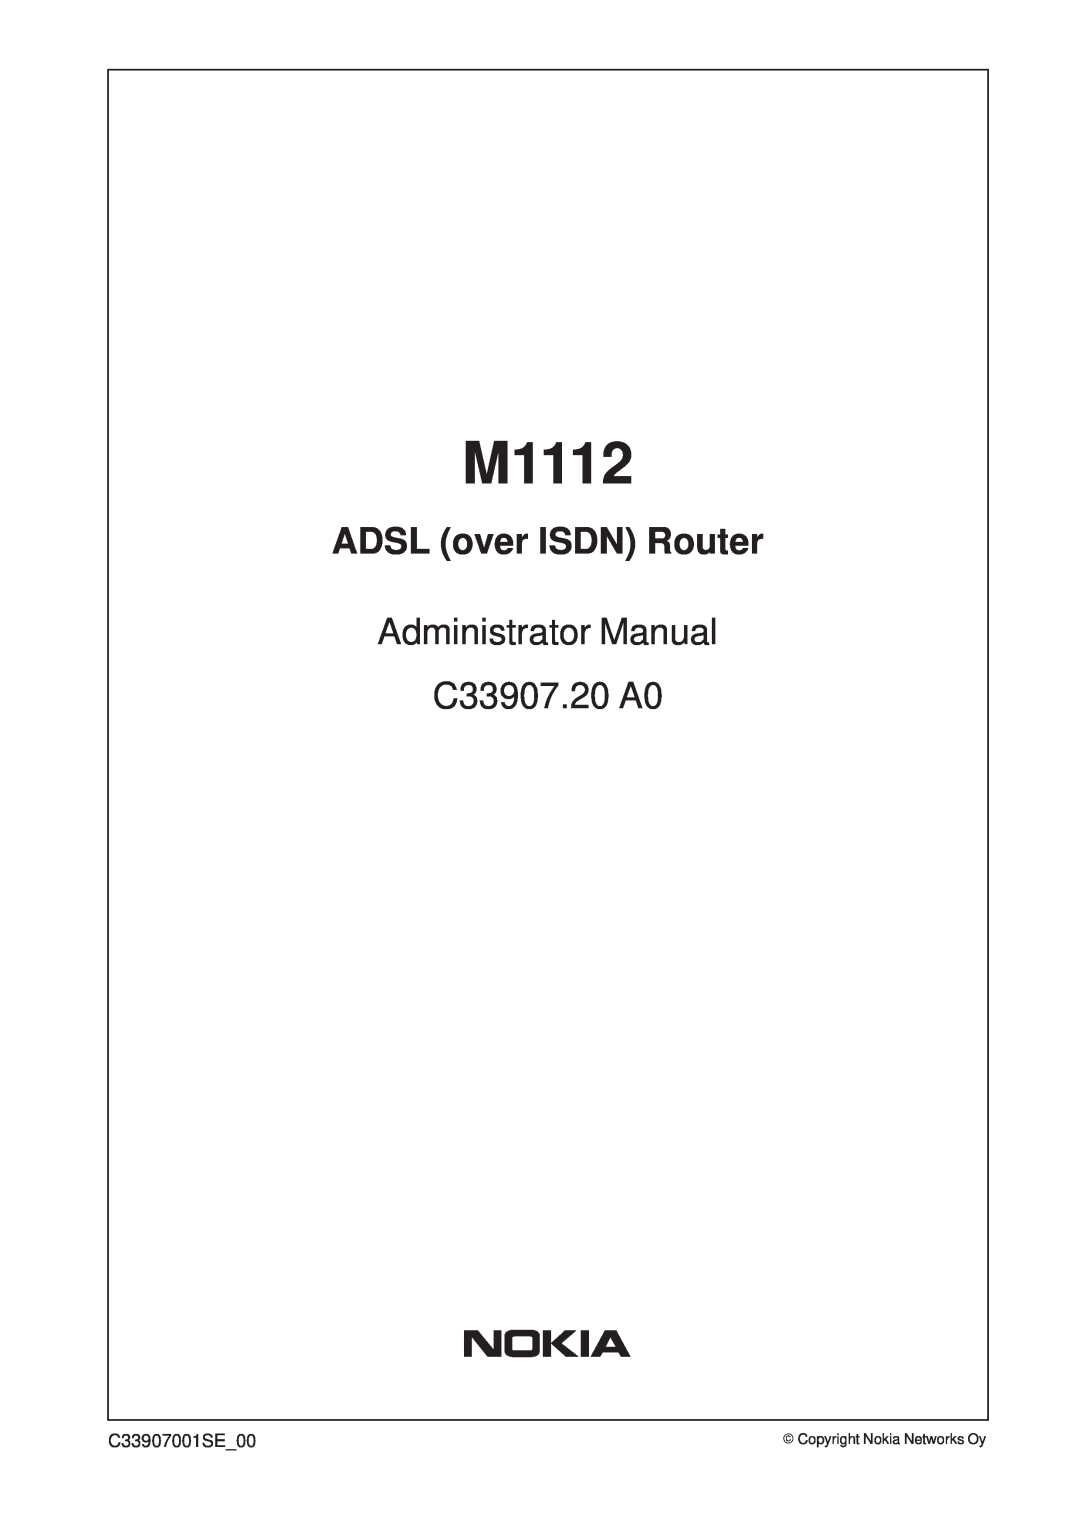 Nokia M1112 manual ADSL over ISDN Router, Administrator Manual C33907.20 A0, E Copyright Nokia Networks Oy 